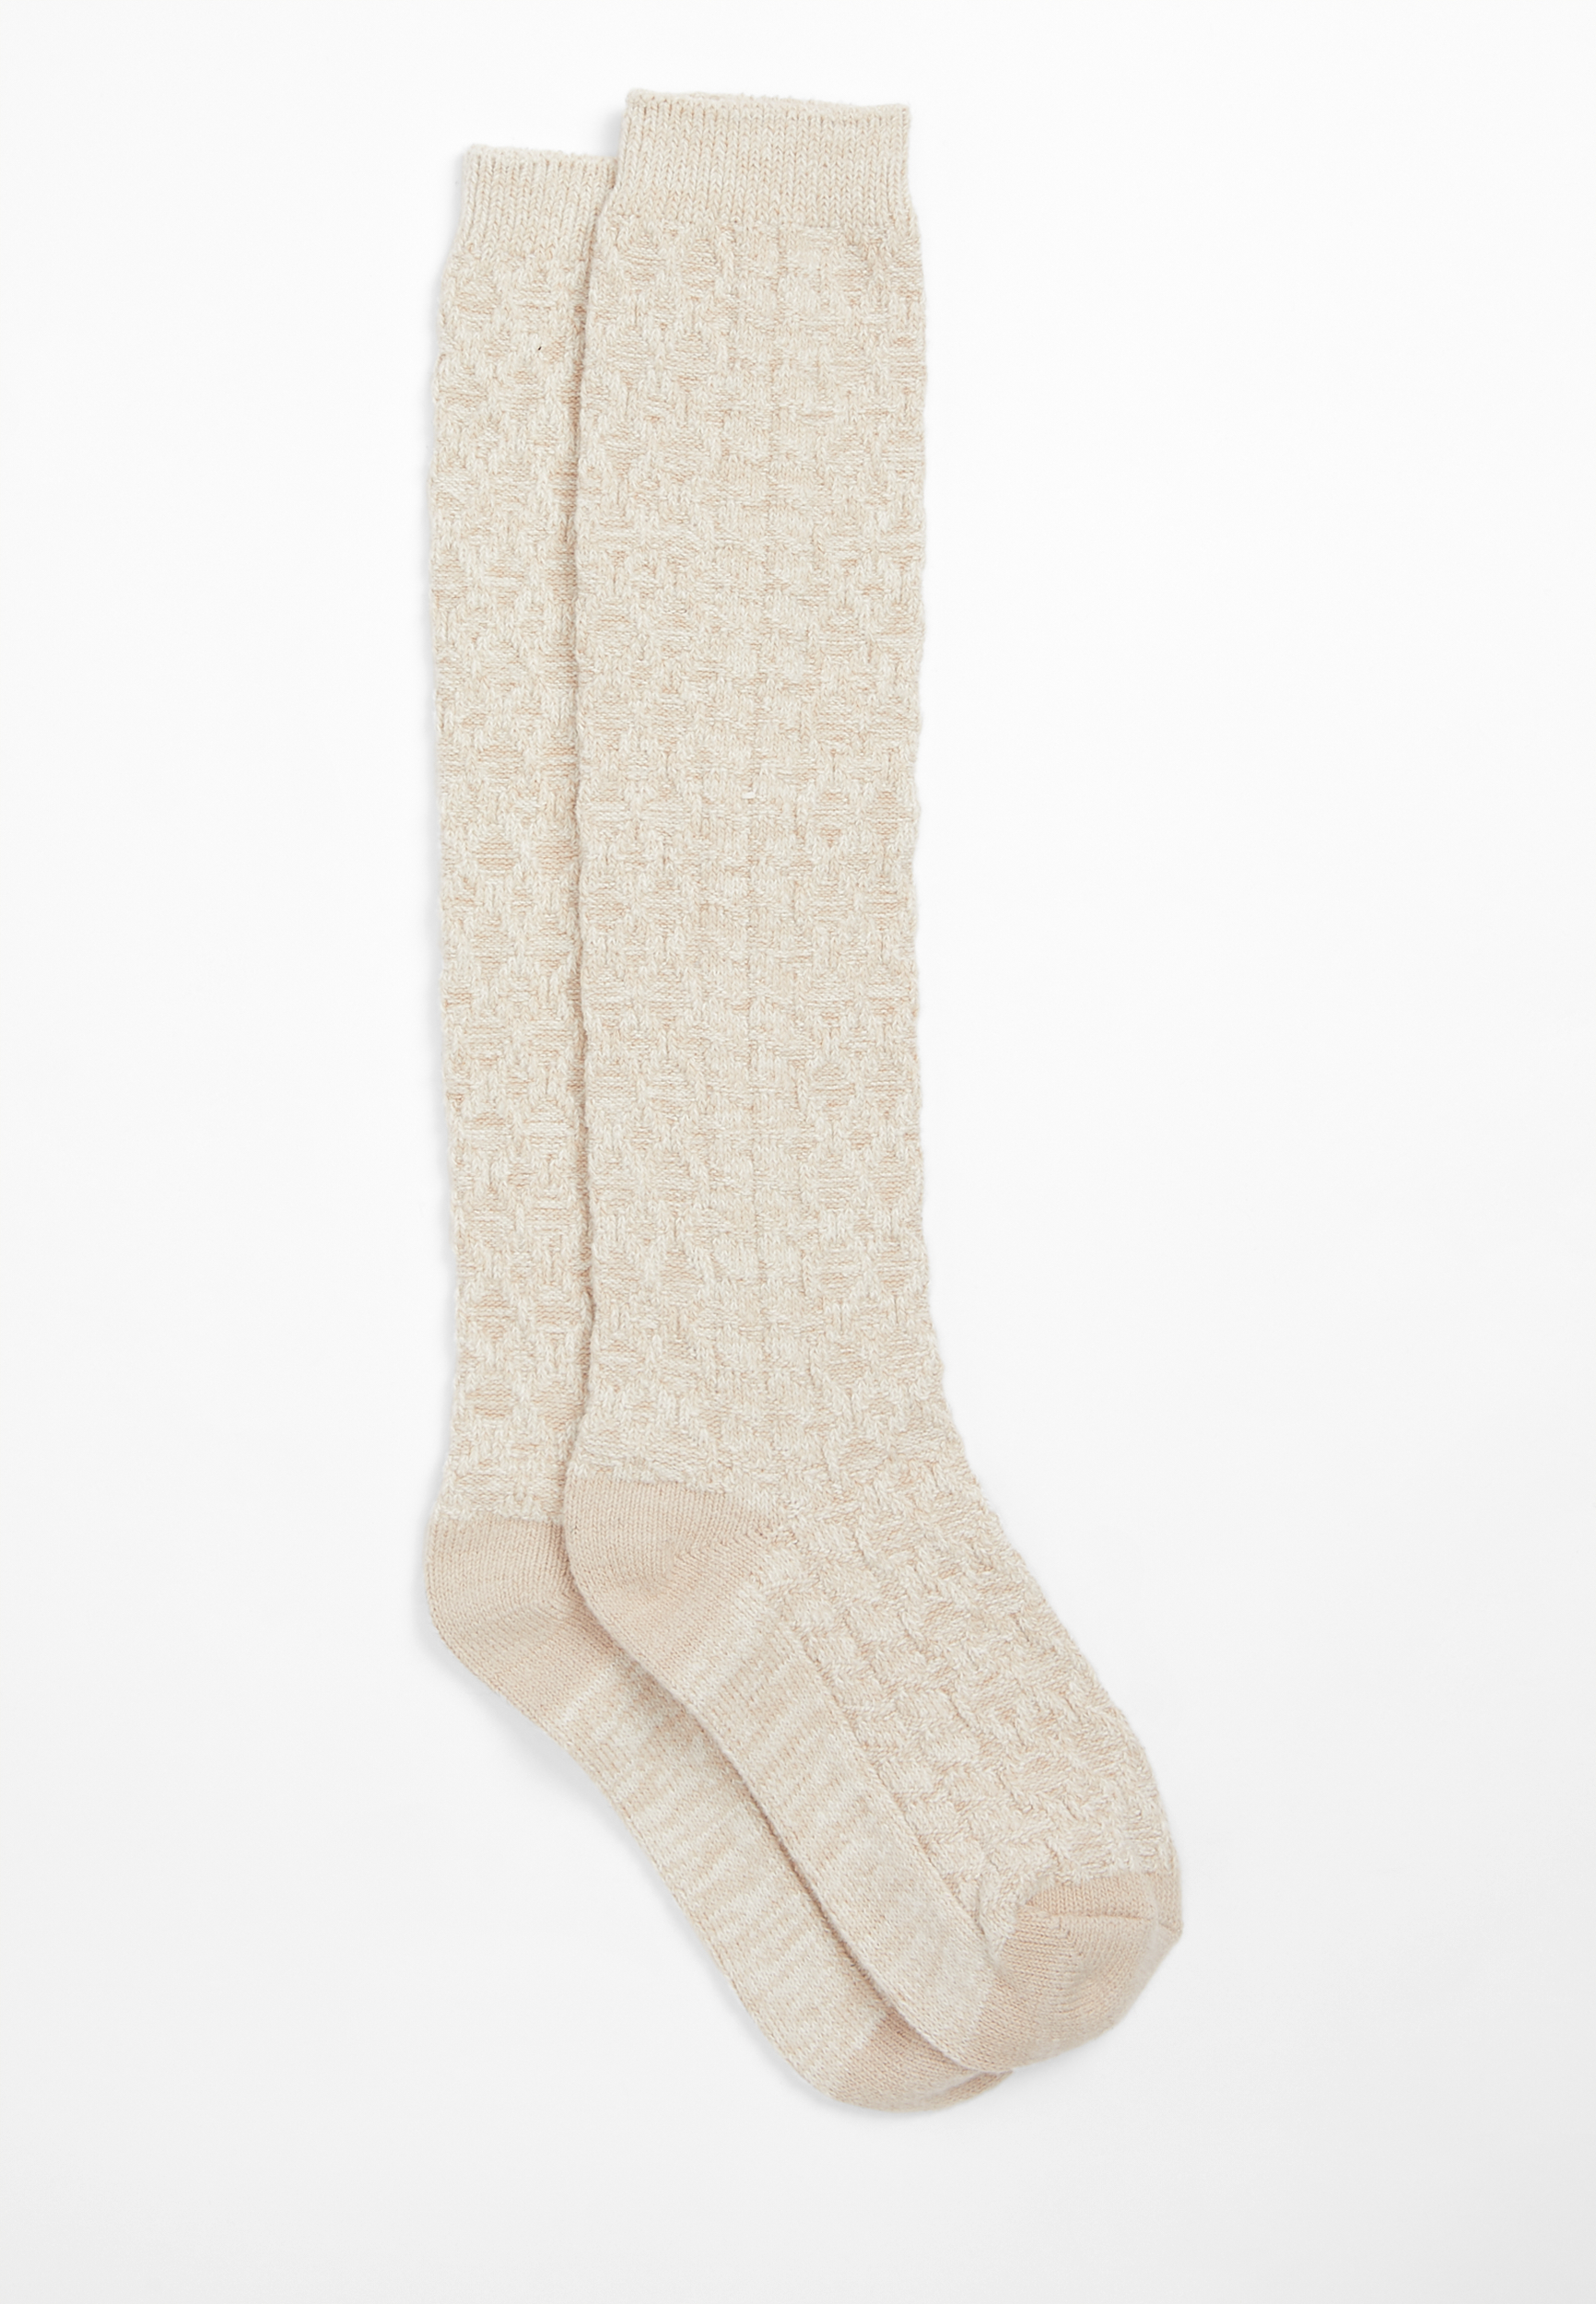 Oatmeal Cable Knee High Socks | maurices